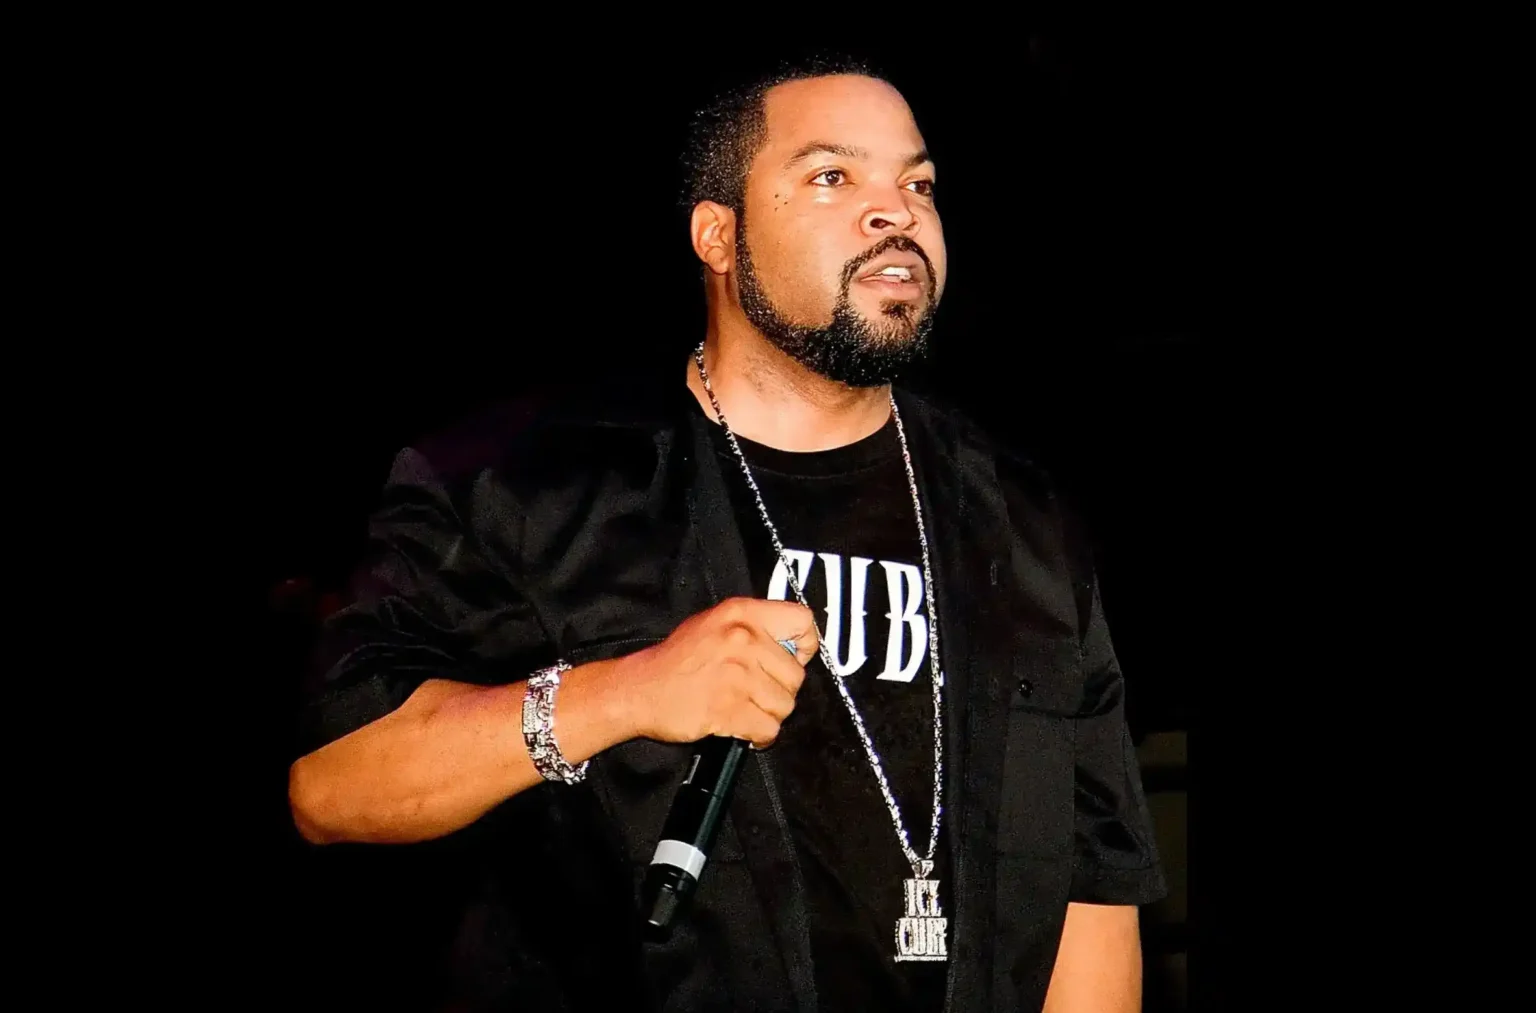 Image of Ice Cube, American rapper, songwriter, actor, and filmmaker, on stage holding a mic.